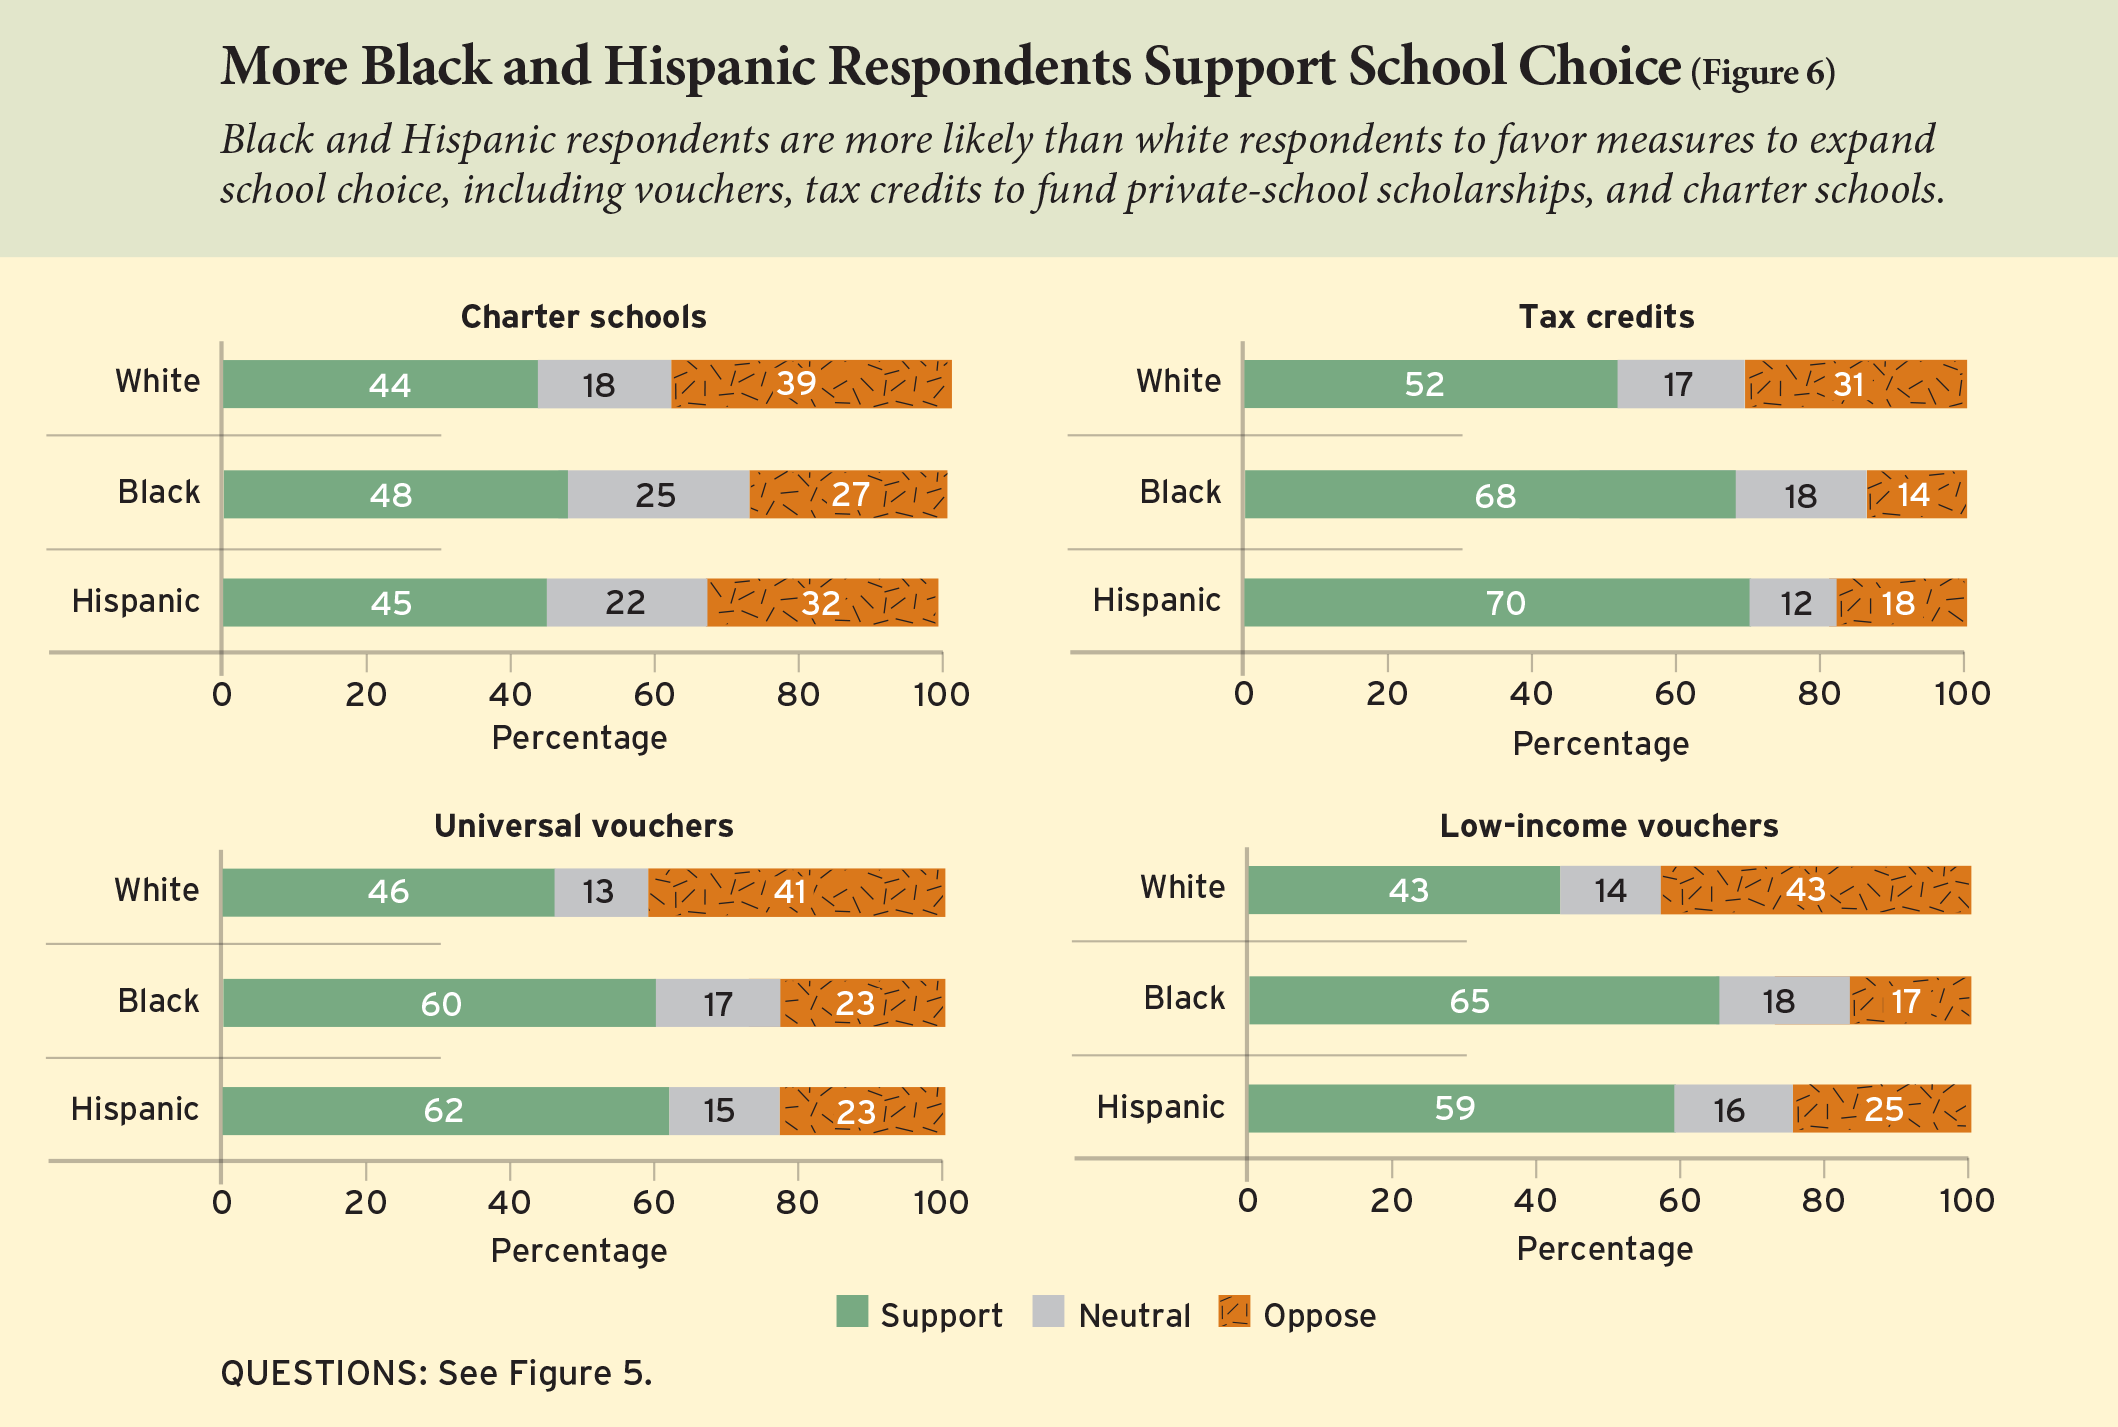 Figure 6: More Black and Hispanic Respondents Support School Choice